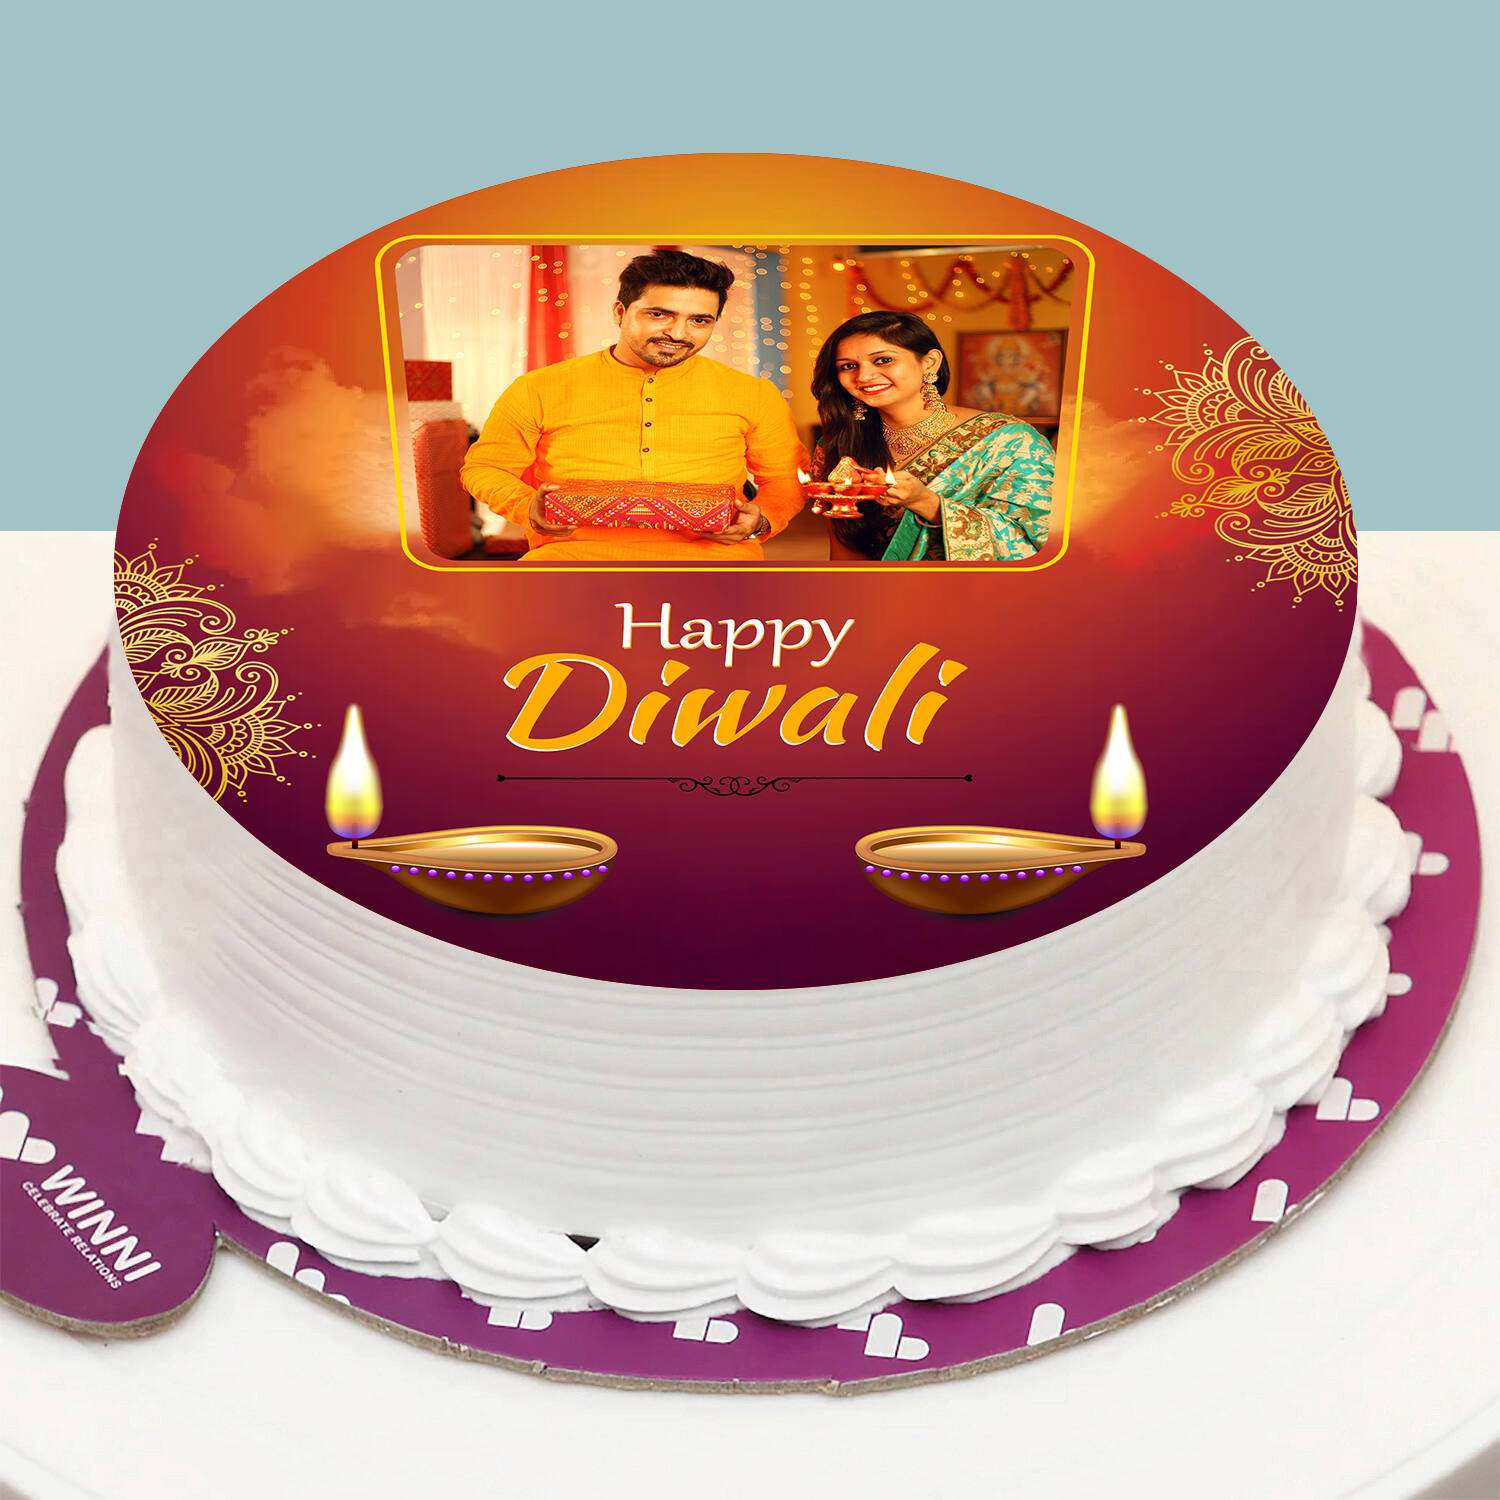 This Diwali Surprise Your Loved Ones with Diwali Cake